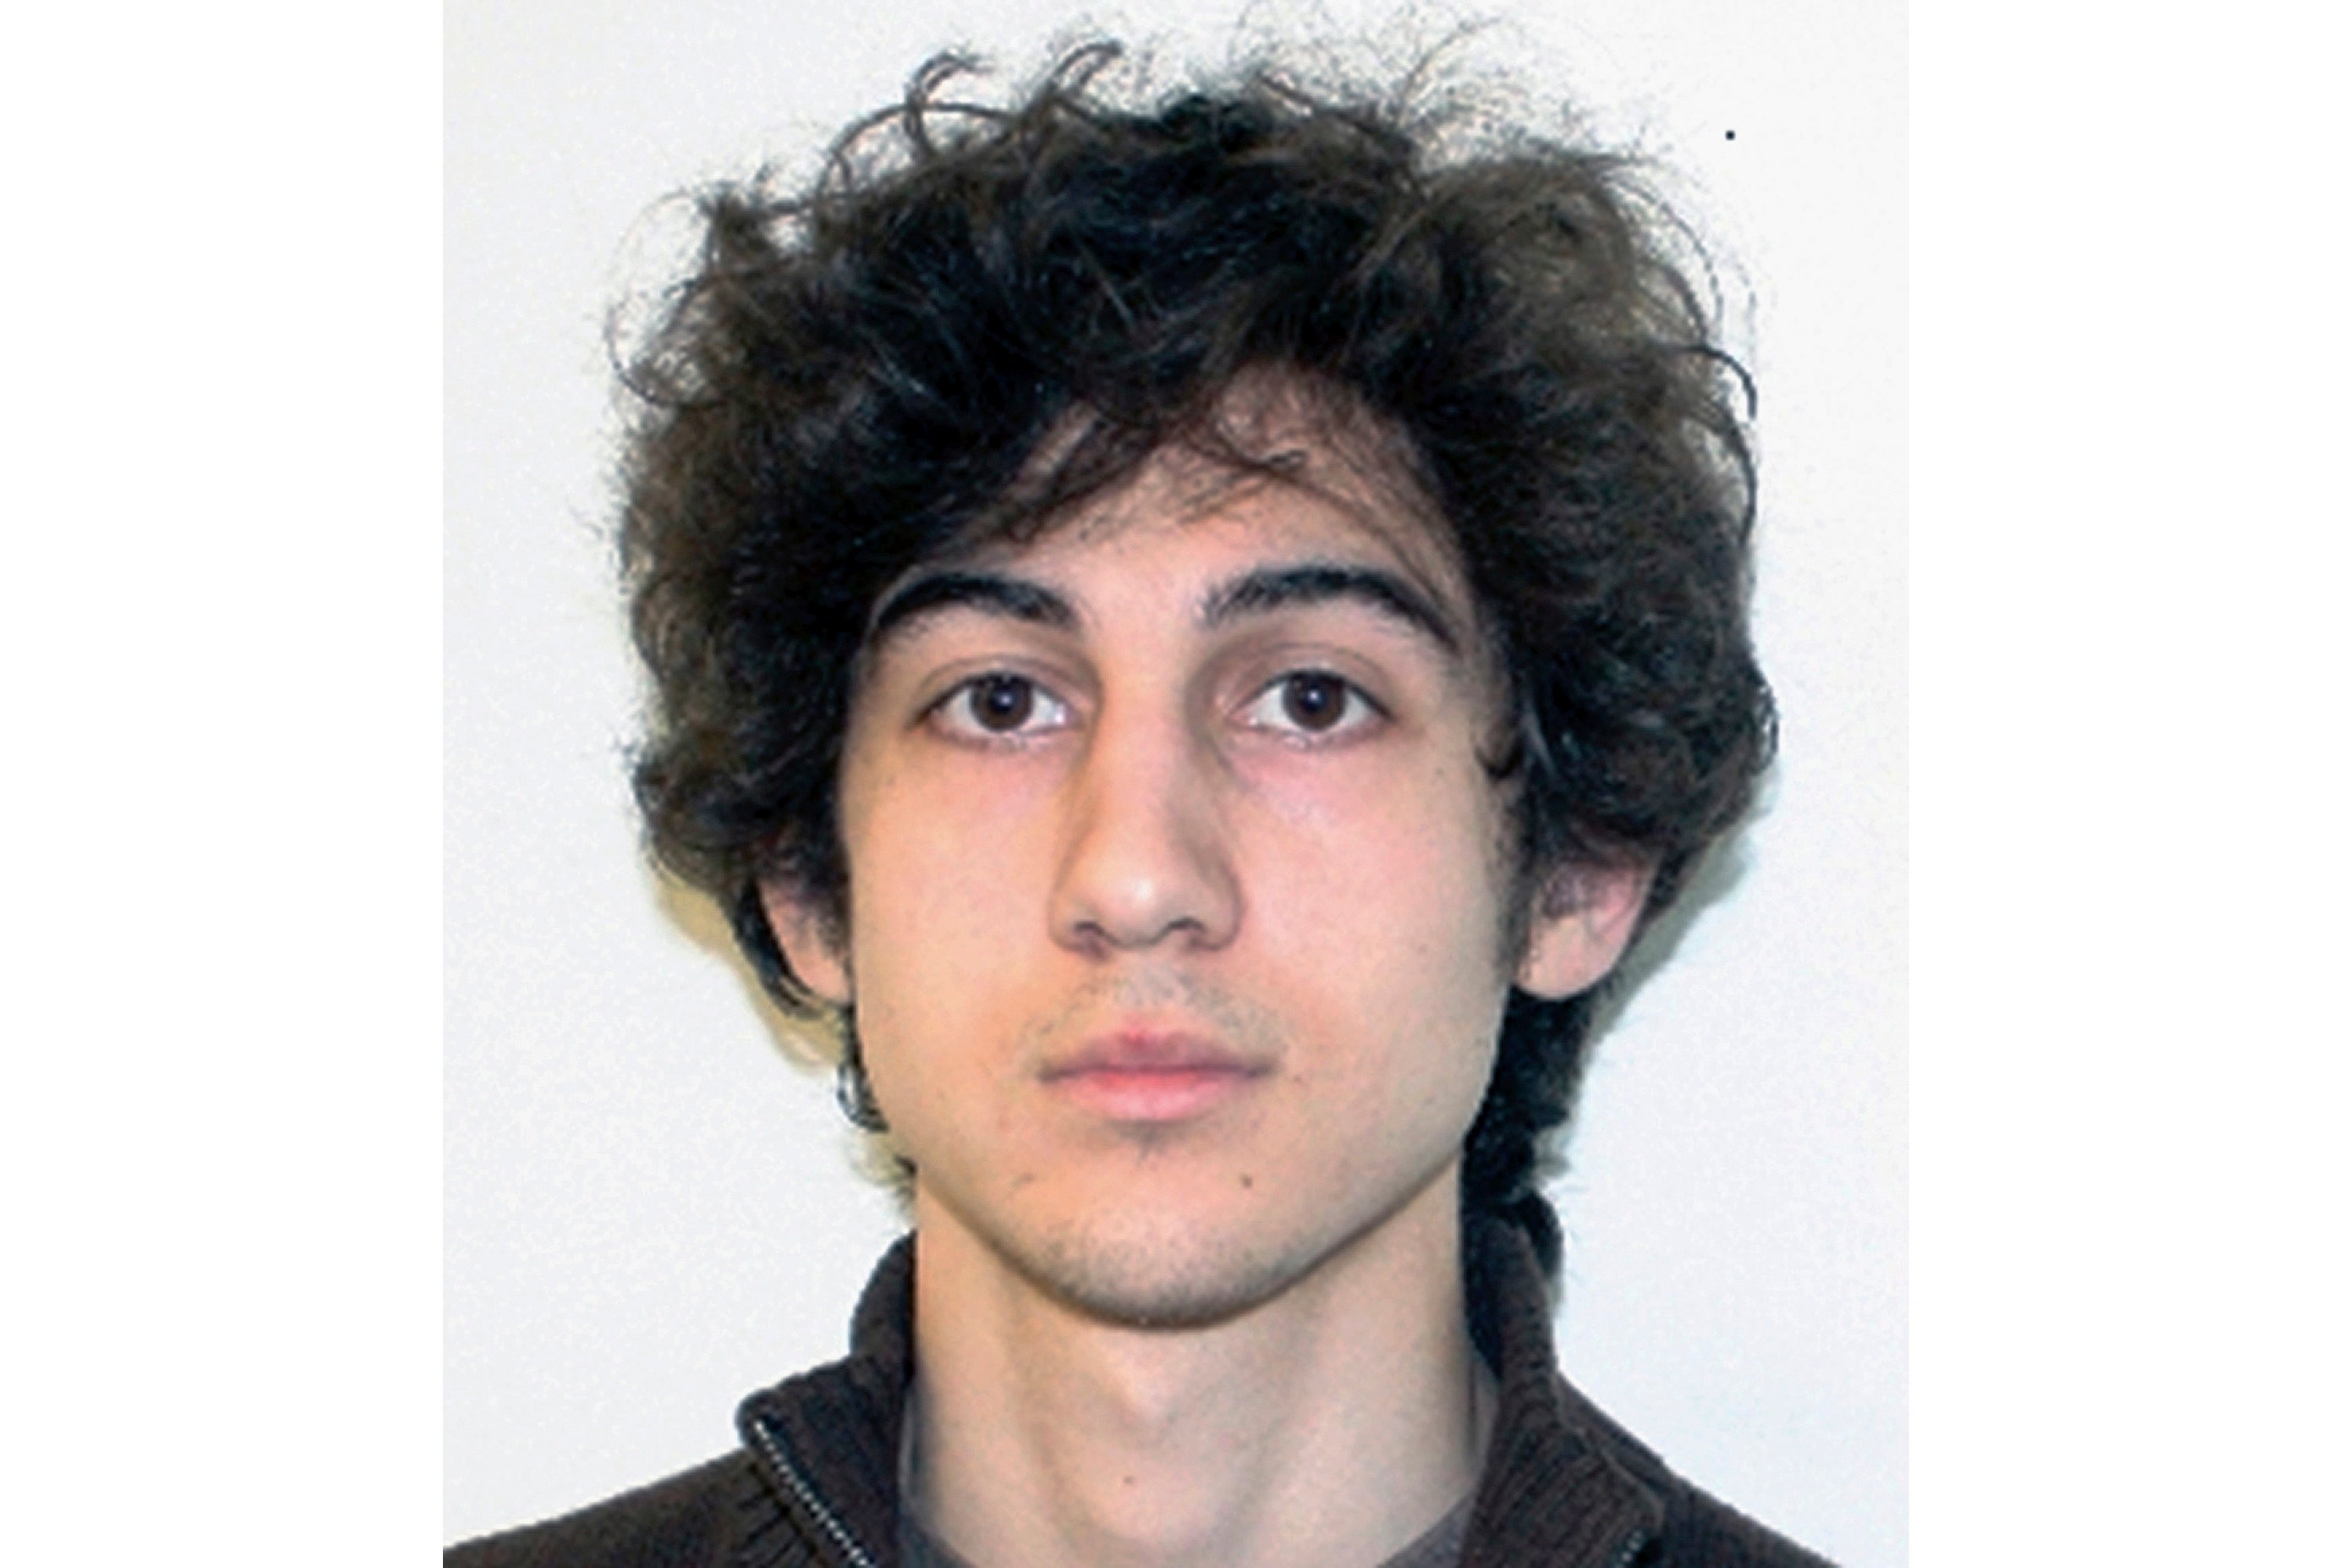 This file photo released April 19, 2013, by the Federal Bureau of Investigation shows Dzhokhar Tsarnaev, convicted for carrying out the April 15, 2013, Boston Marathon bombing attack that killed three people and injured more than 260.